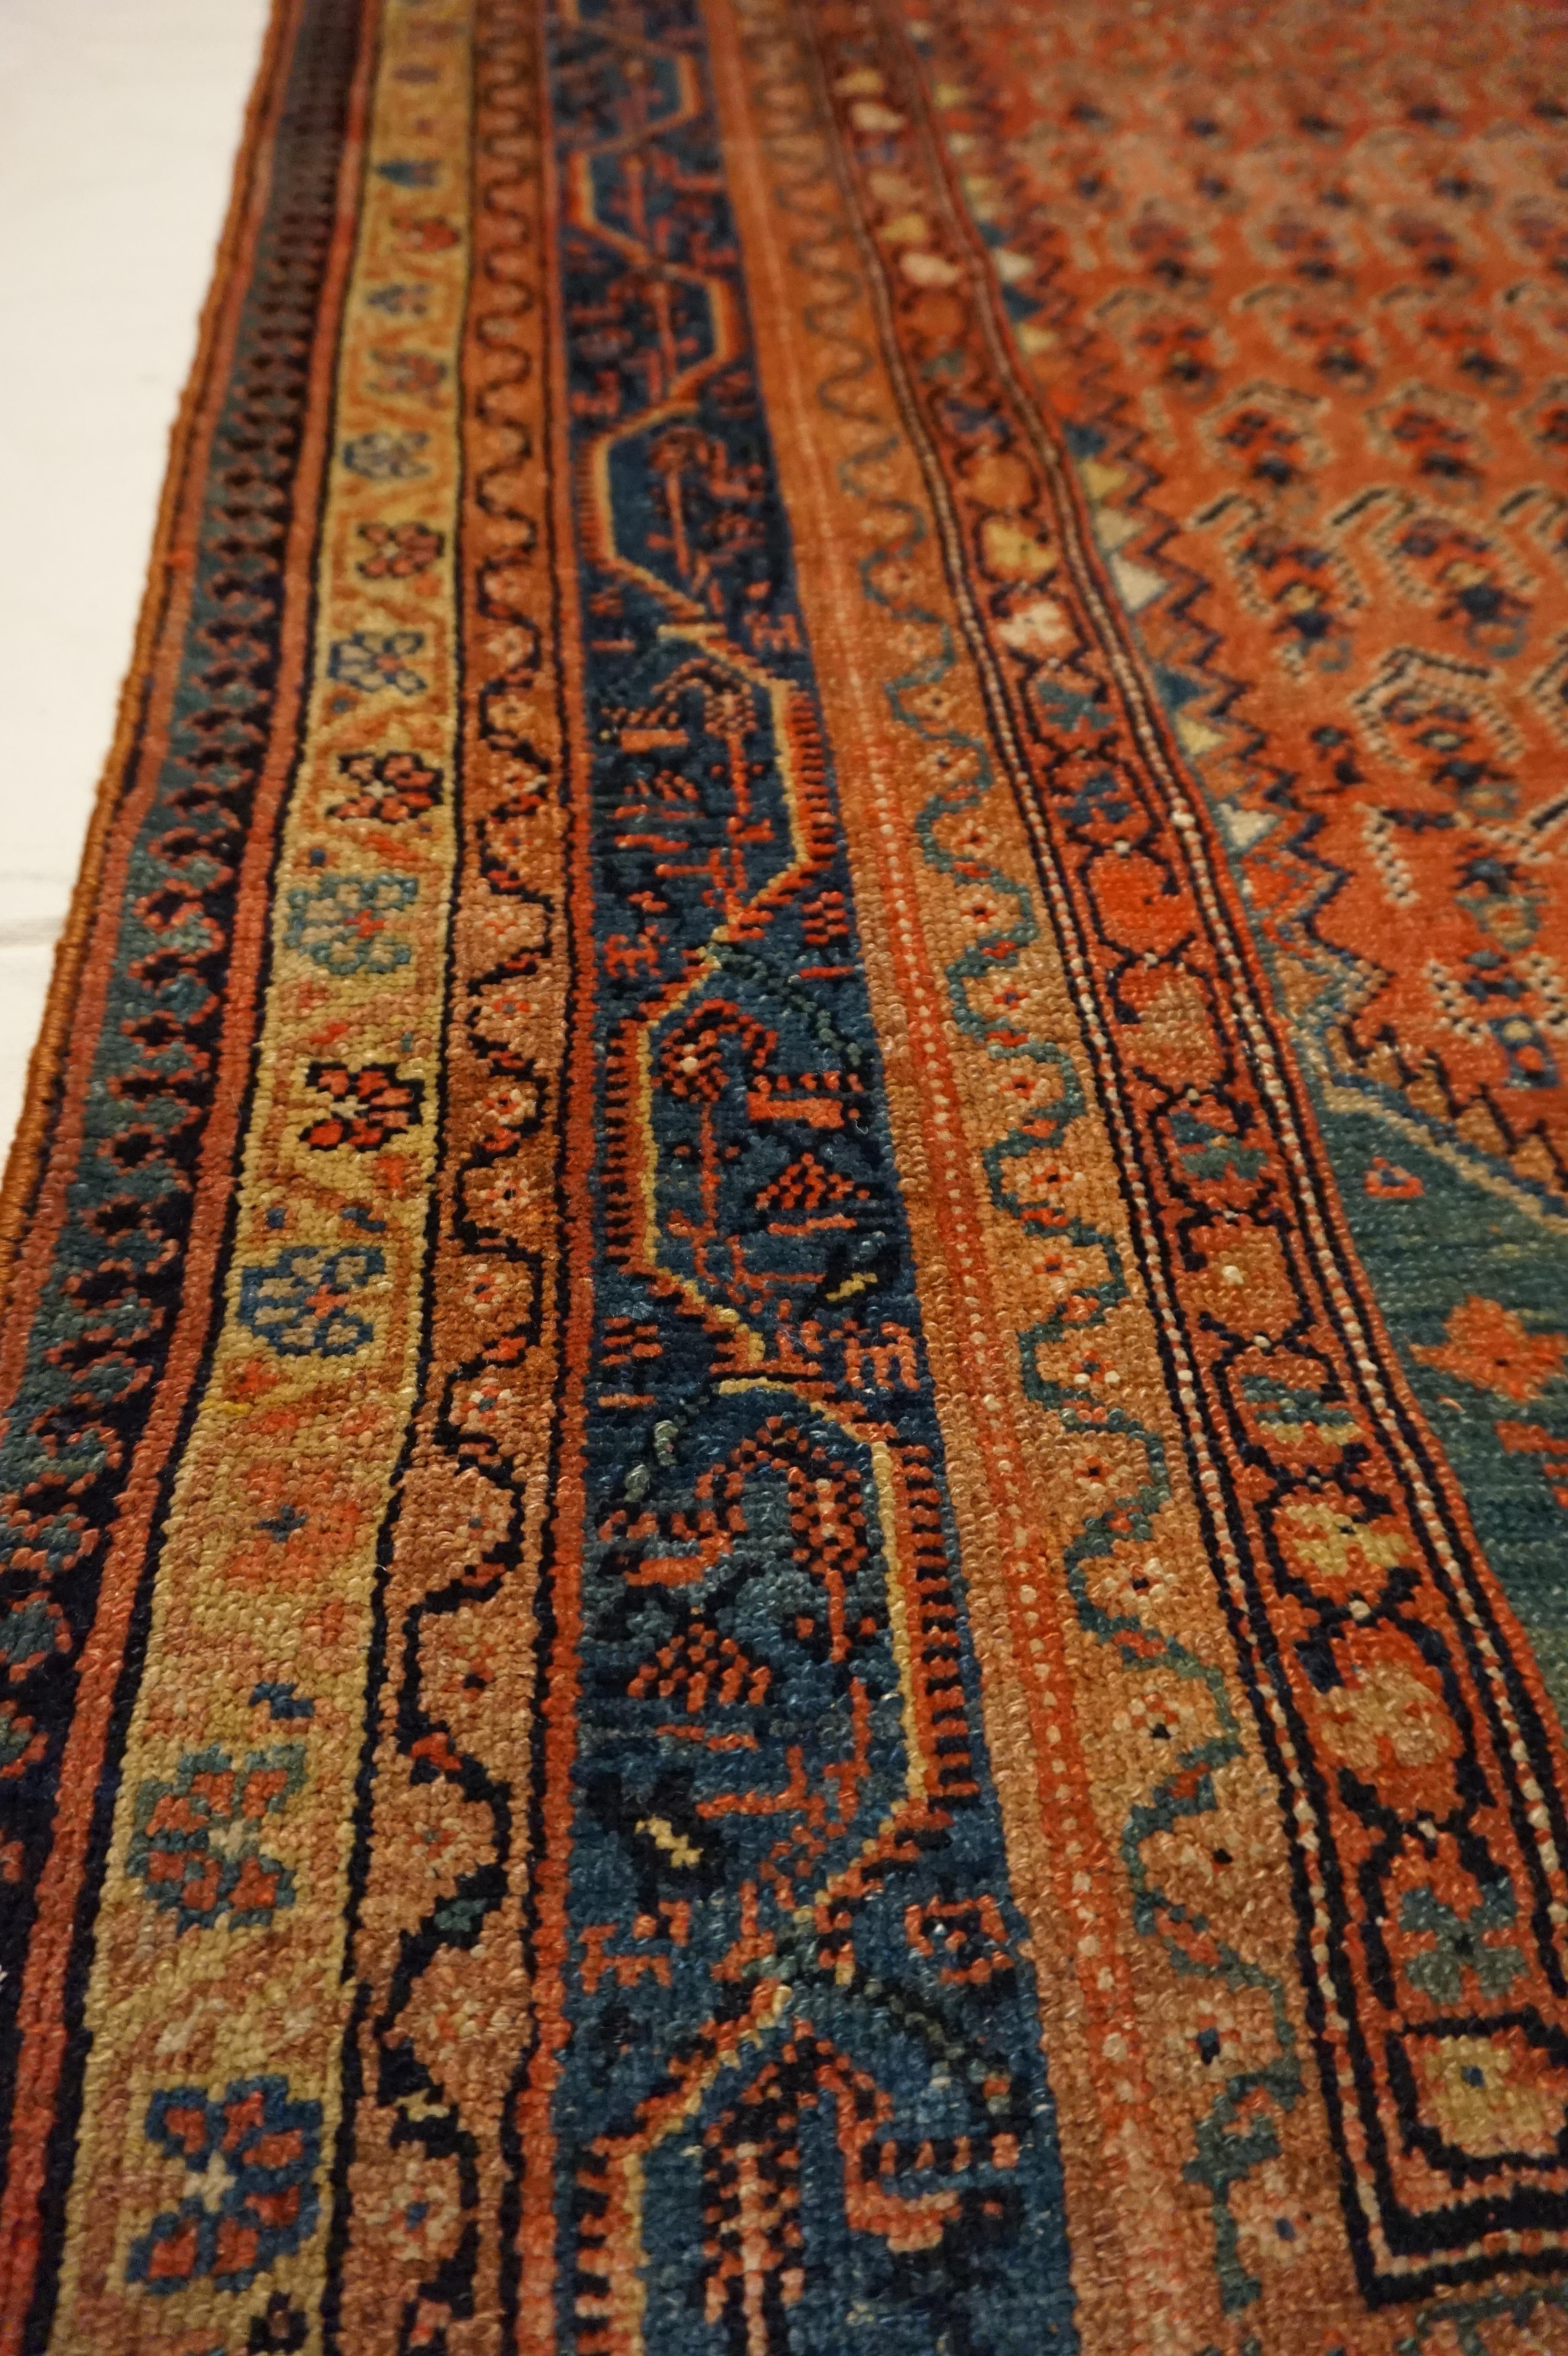 Wool 19th Century Tribal Boteh Paisley Hand-knotted Rug In Rust Hues For Sale